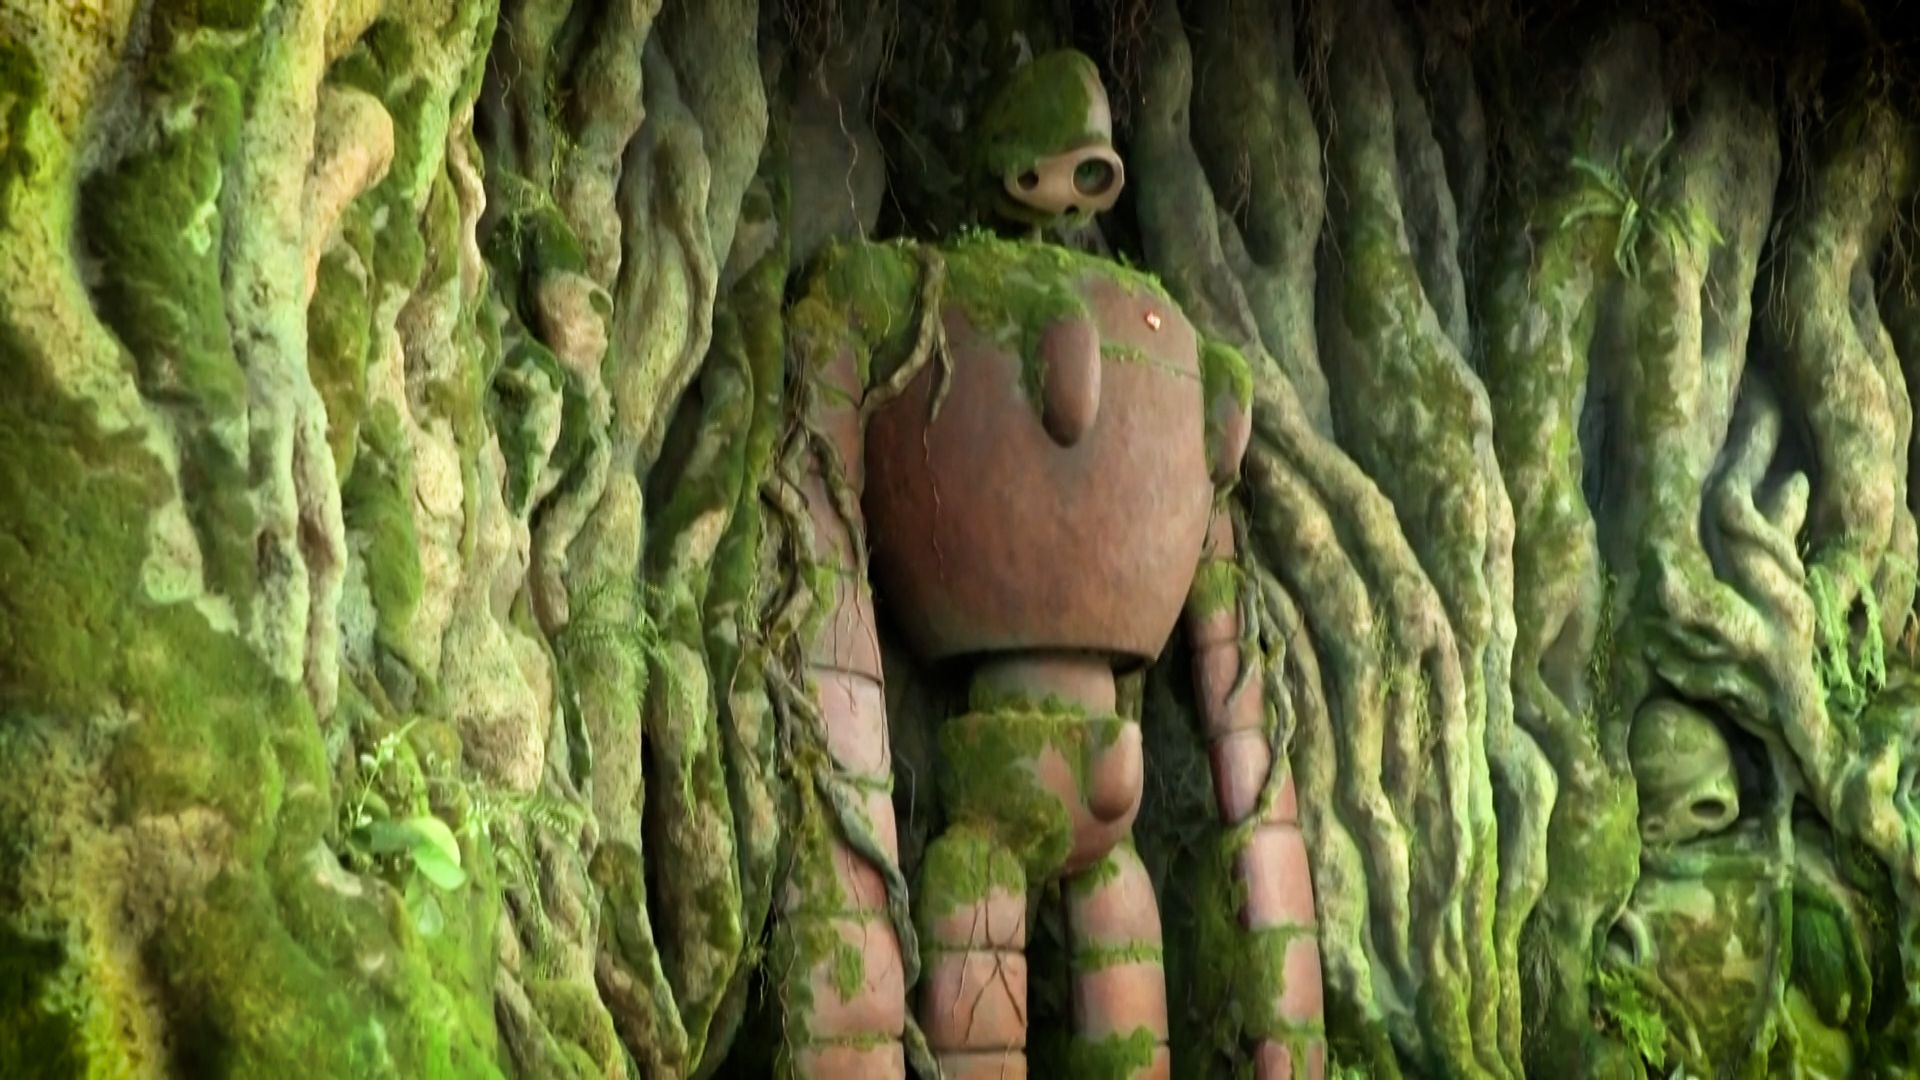 Ghibli Park: Long-awaited Japan attraction opens to visitors | CNN